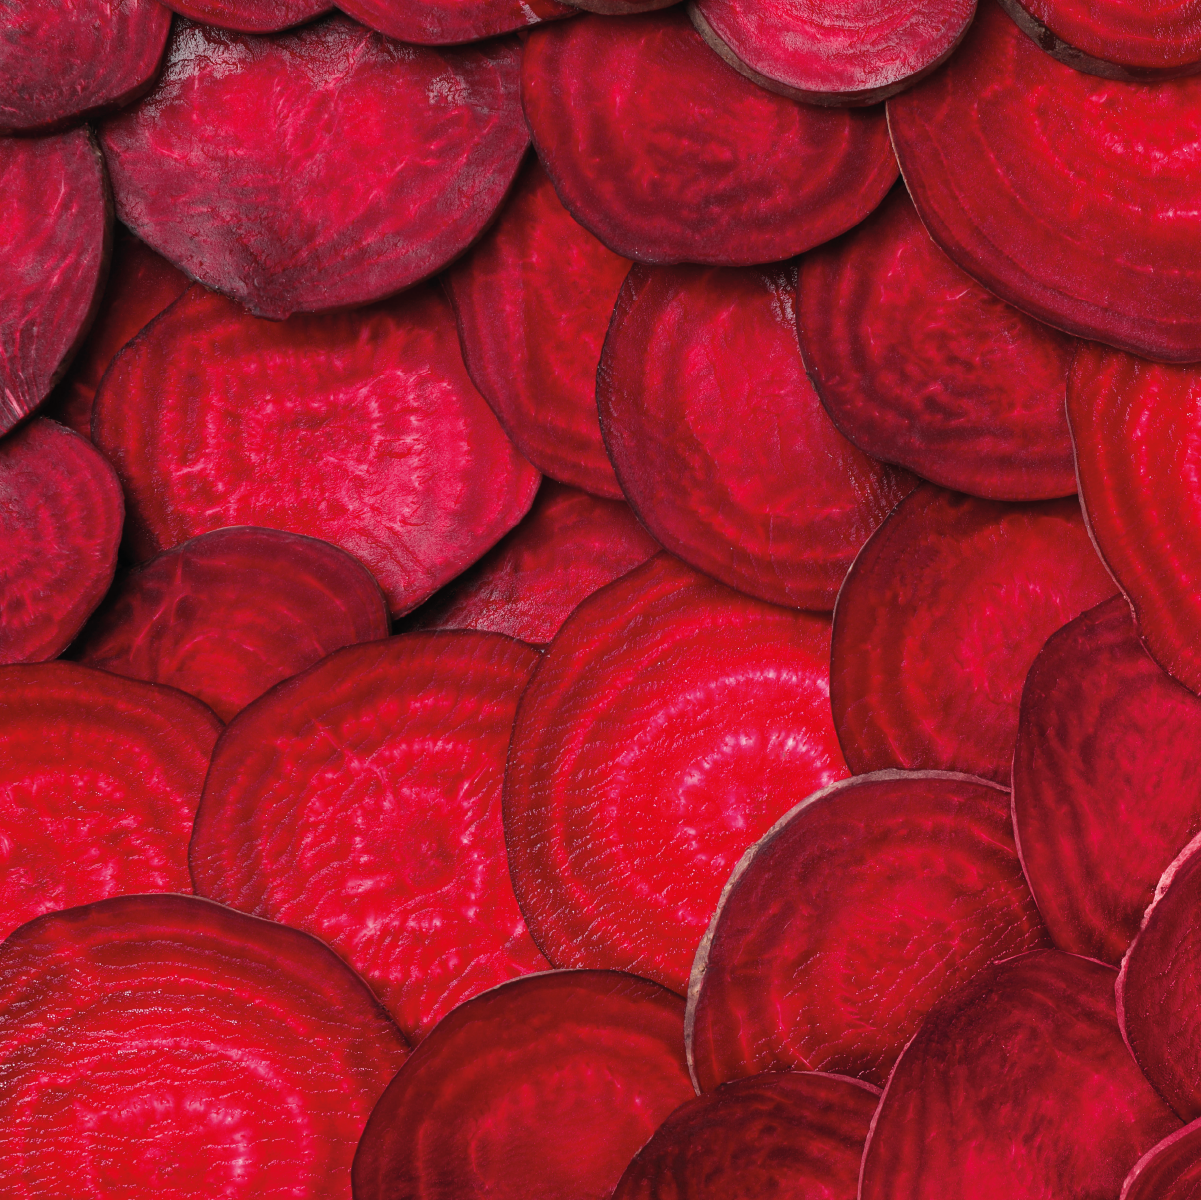 Power Beets (210g) (2)